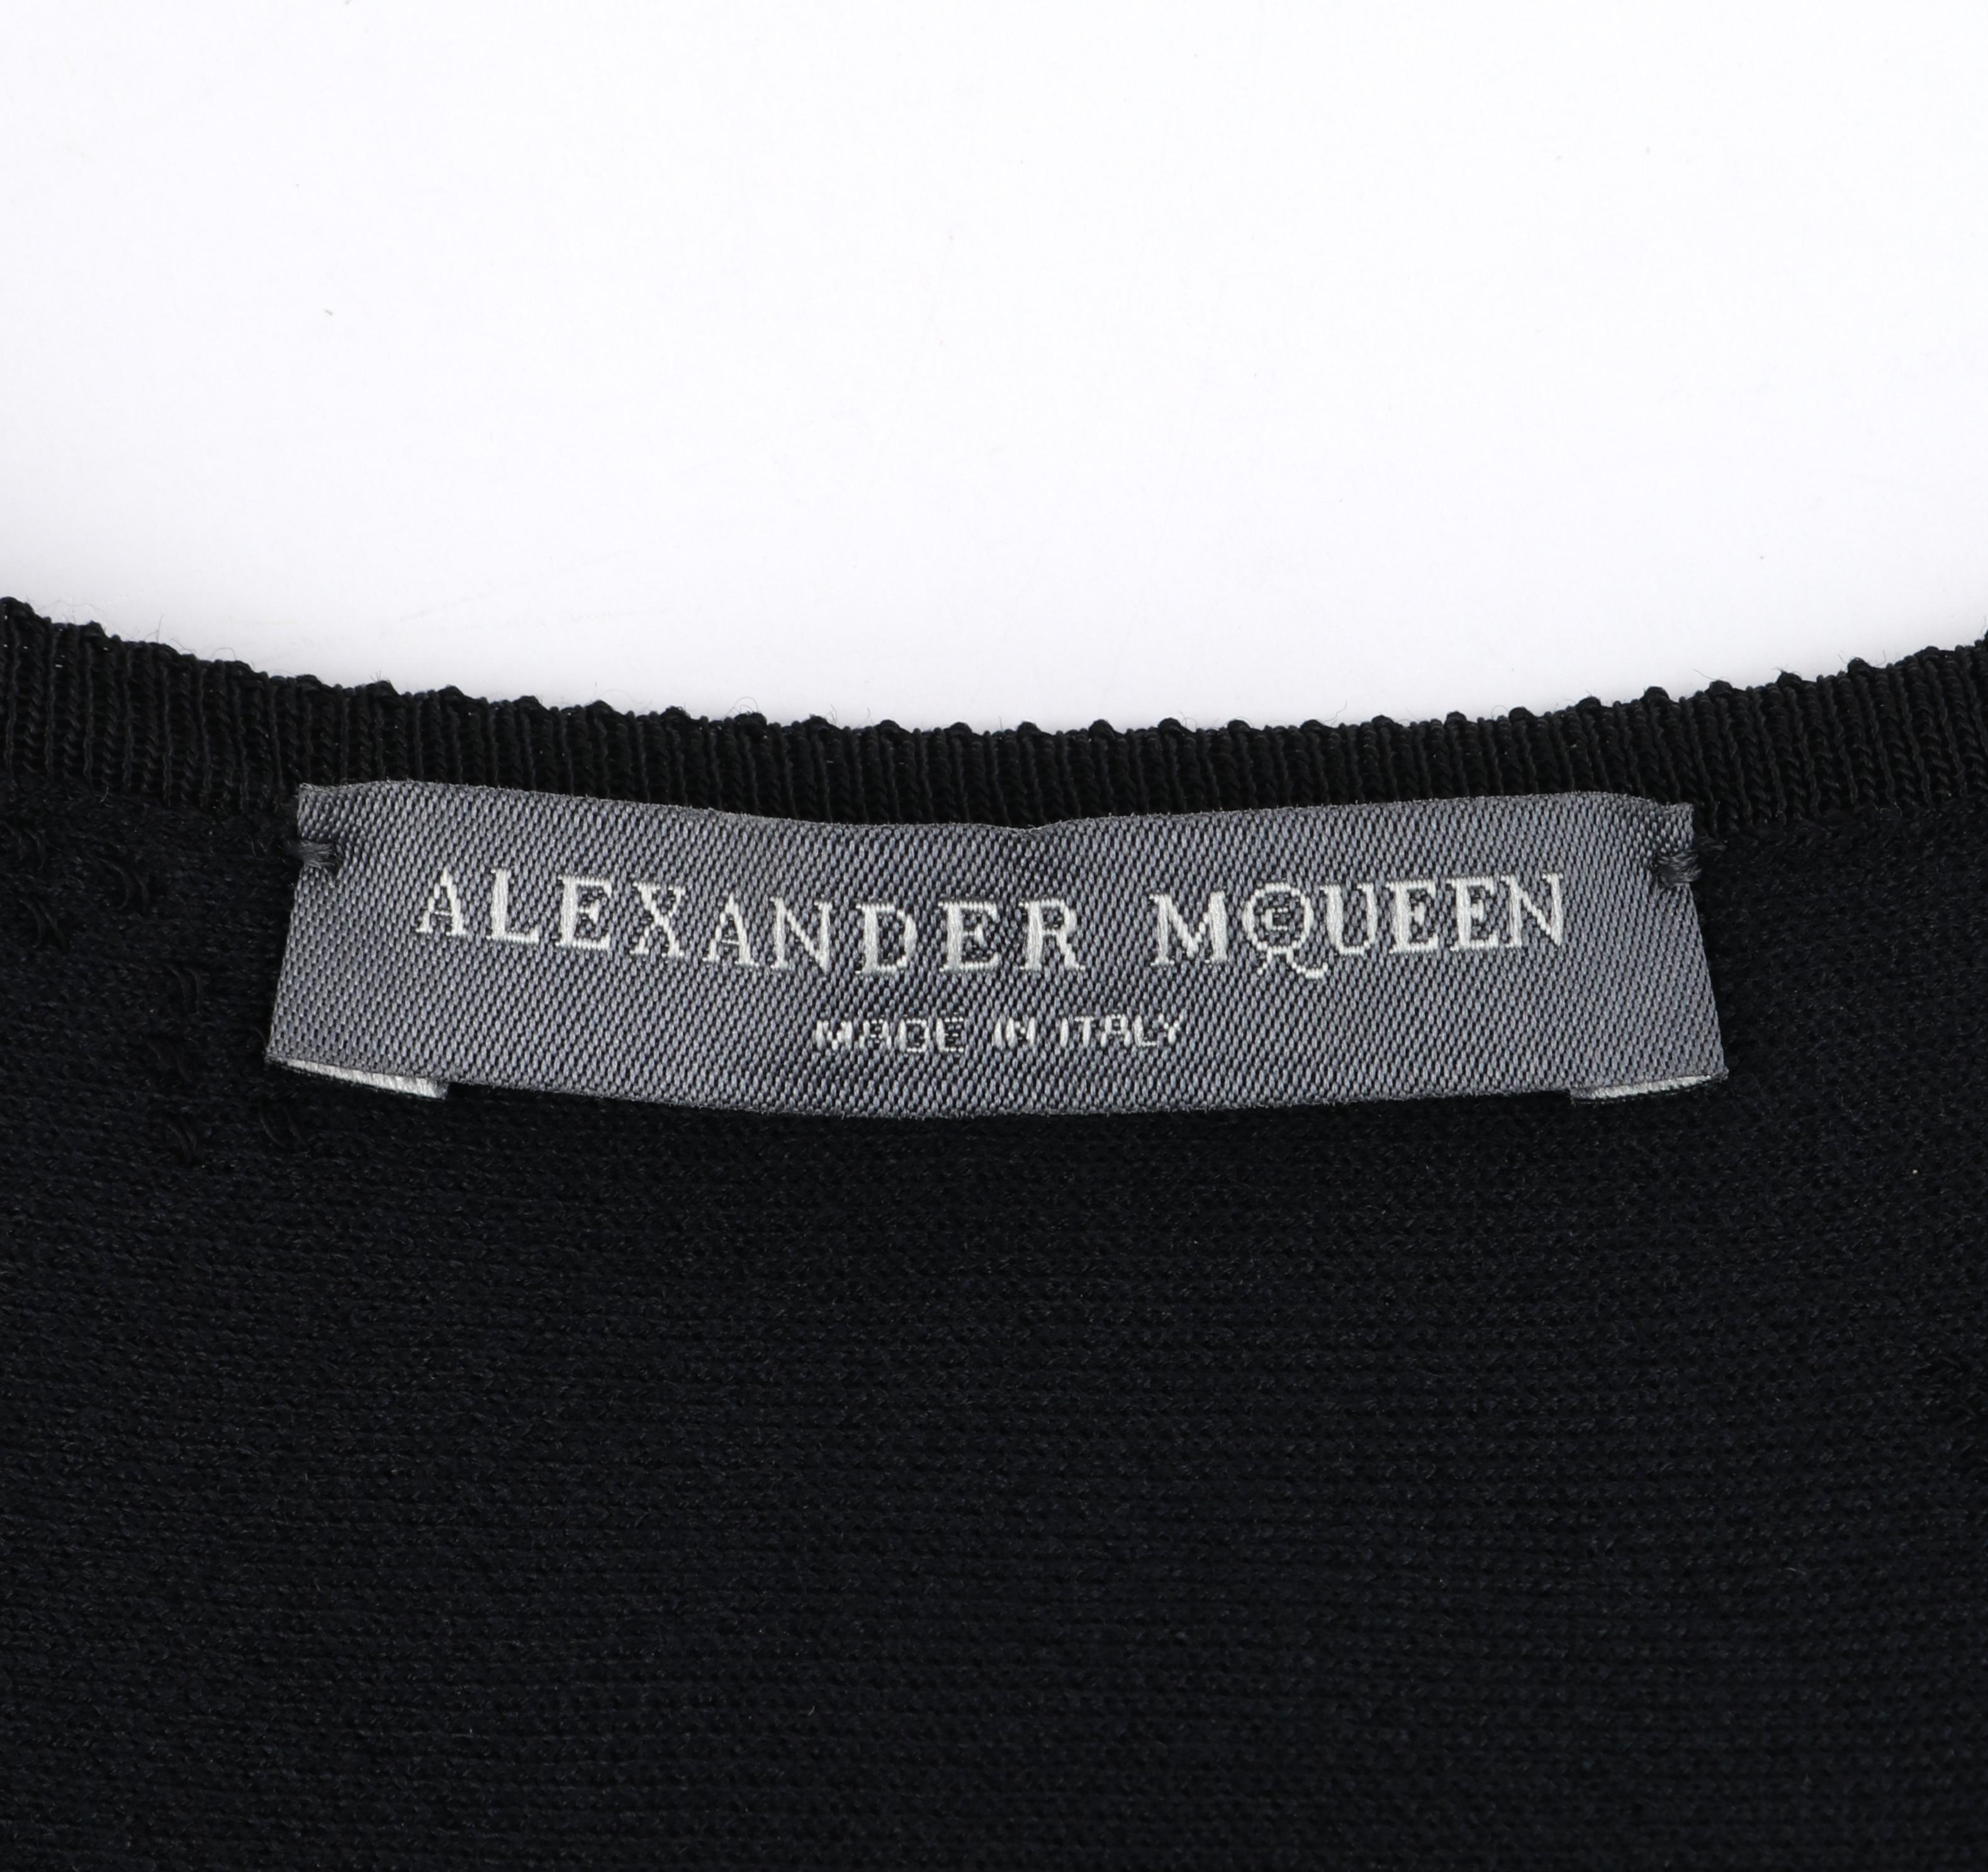 ALEXANDER McQUEEN A/W 2008 Floral Lace Knit Fit & Flare Ruffle Layer Skirt Dress In Fair Condition For Sale In Thiensville, WI